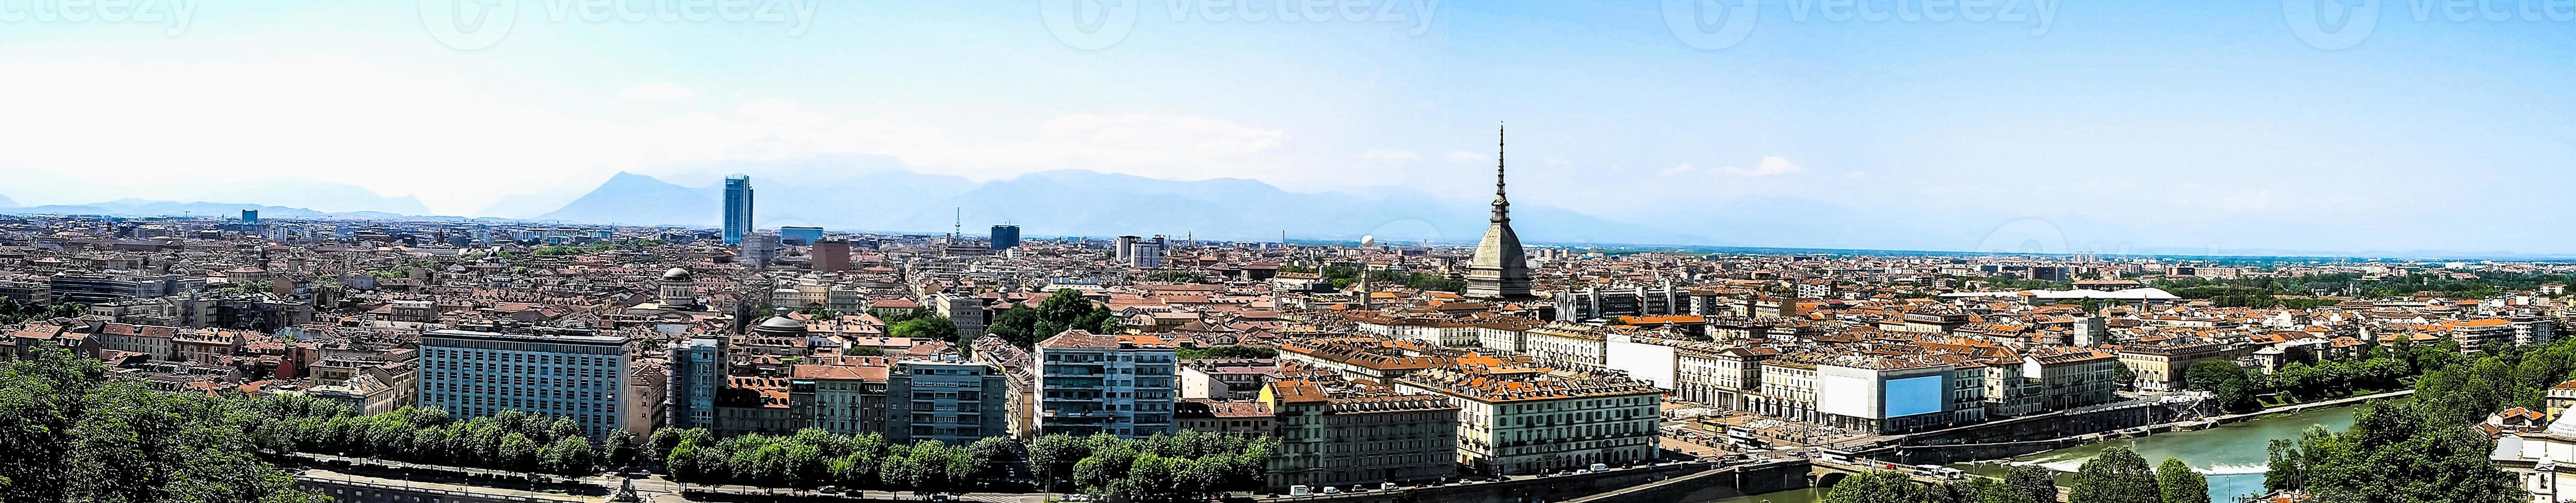 hdr turin vue panoramique photo